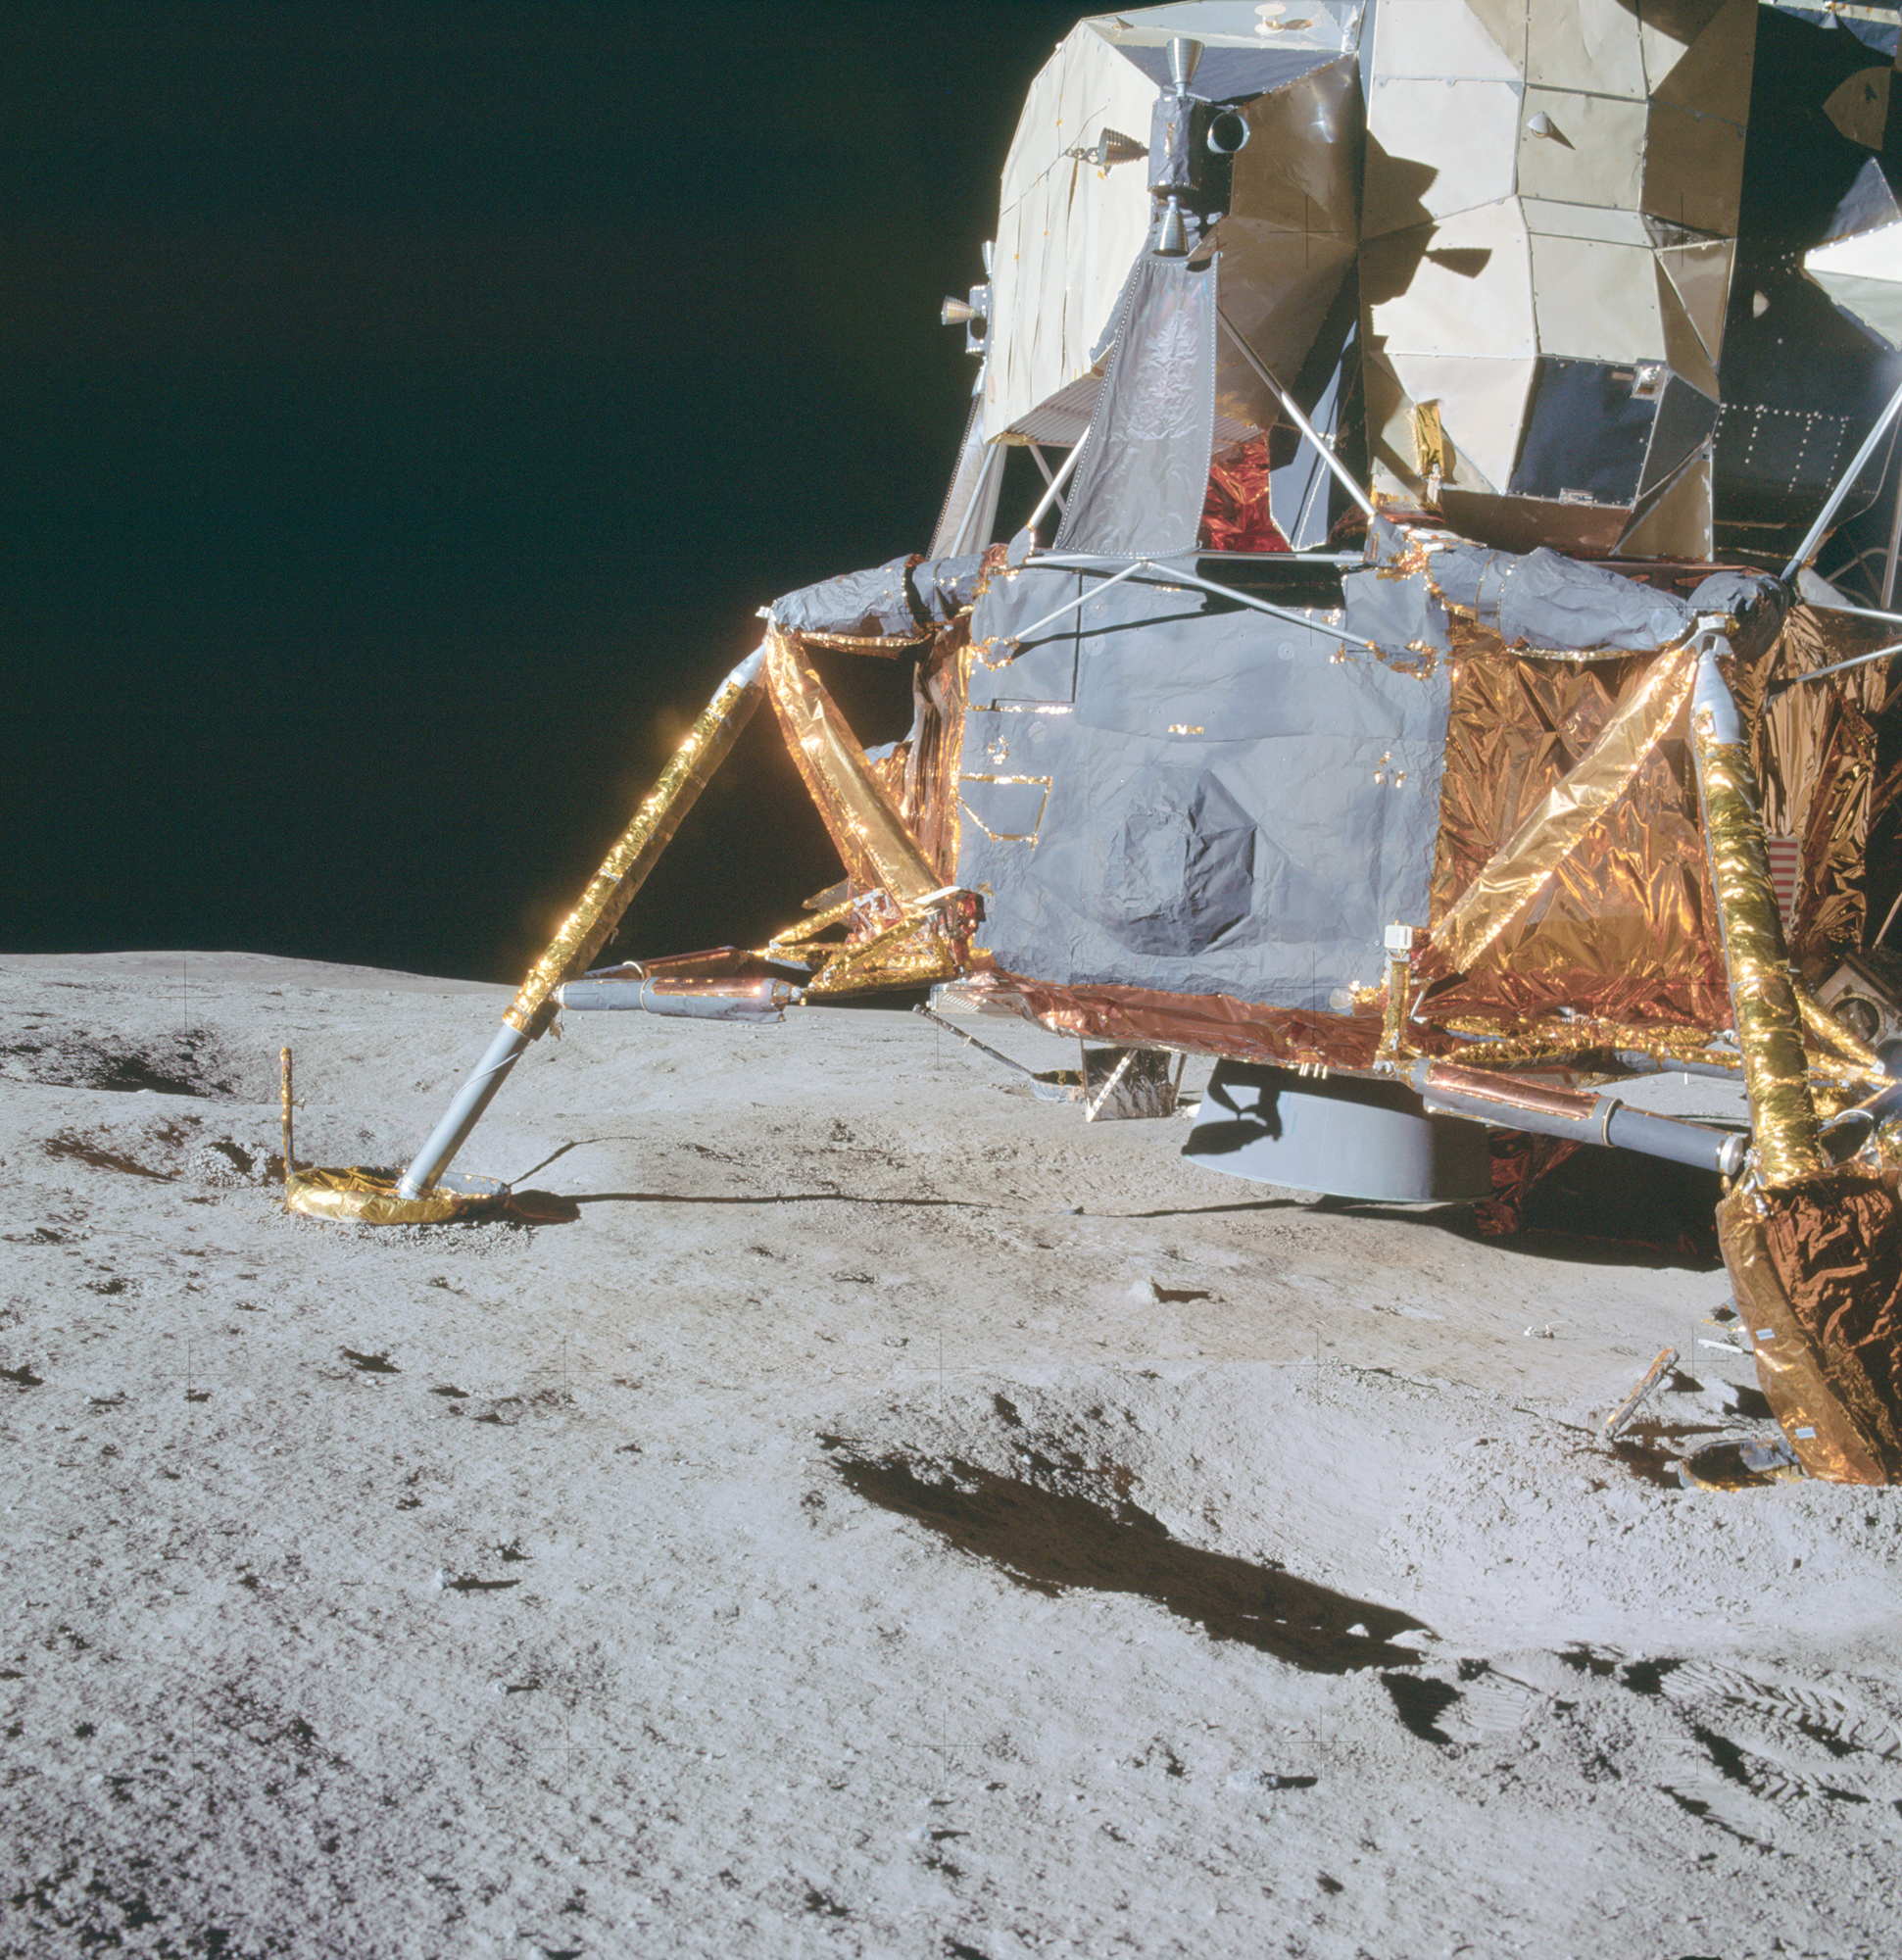 apollo-14-right-side-and-aft-section-of-the-lunar-module-near-a-crater.jpg